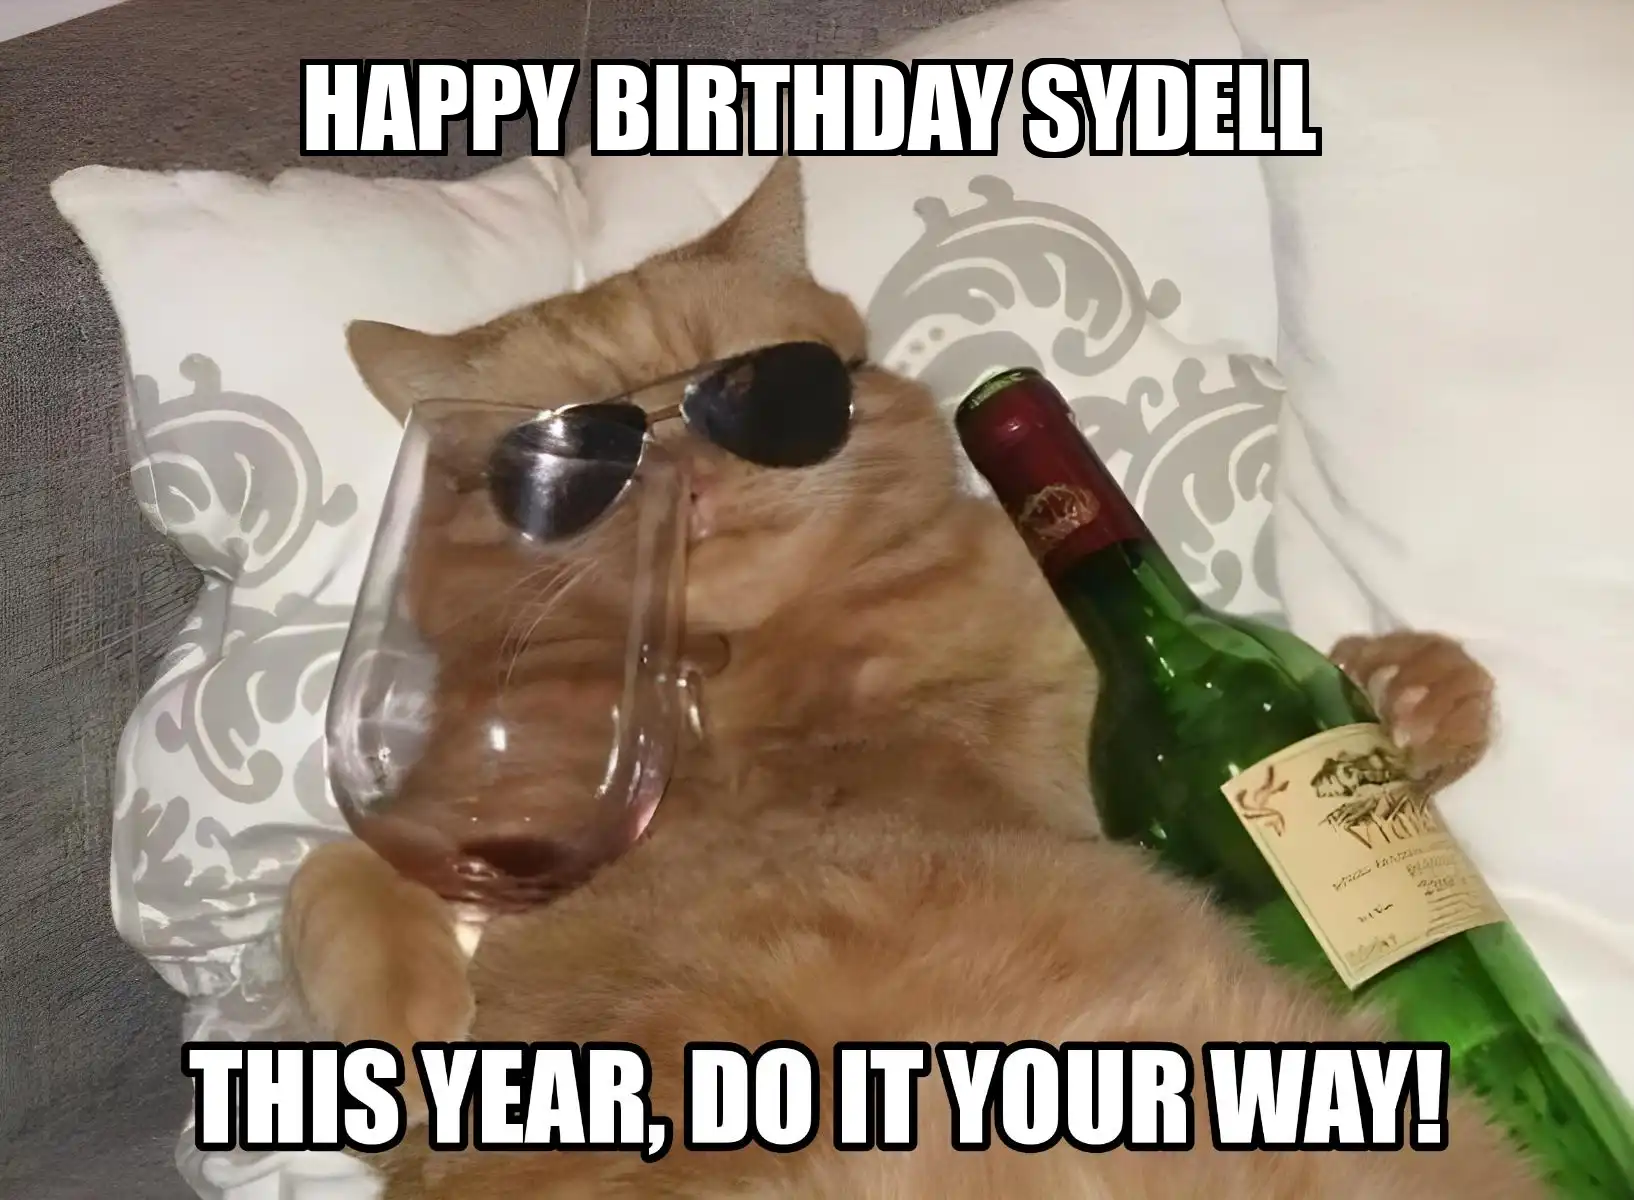 Happy Birthday Sydell This Year Do It Your Way Meme